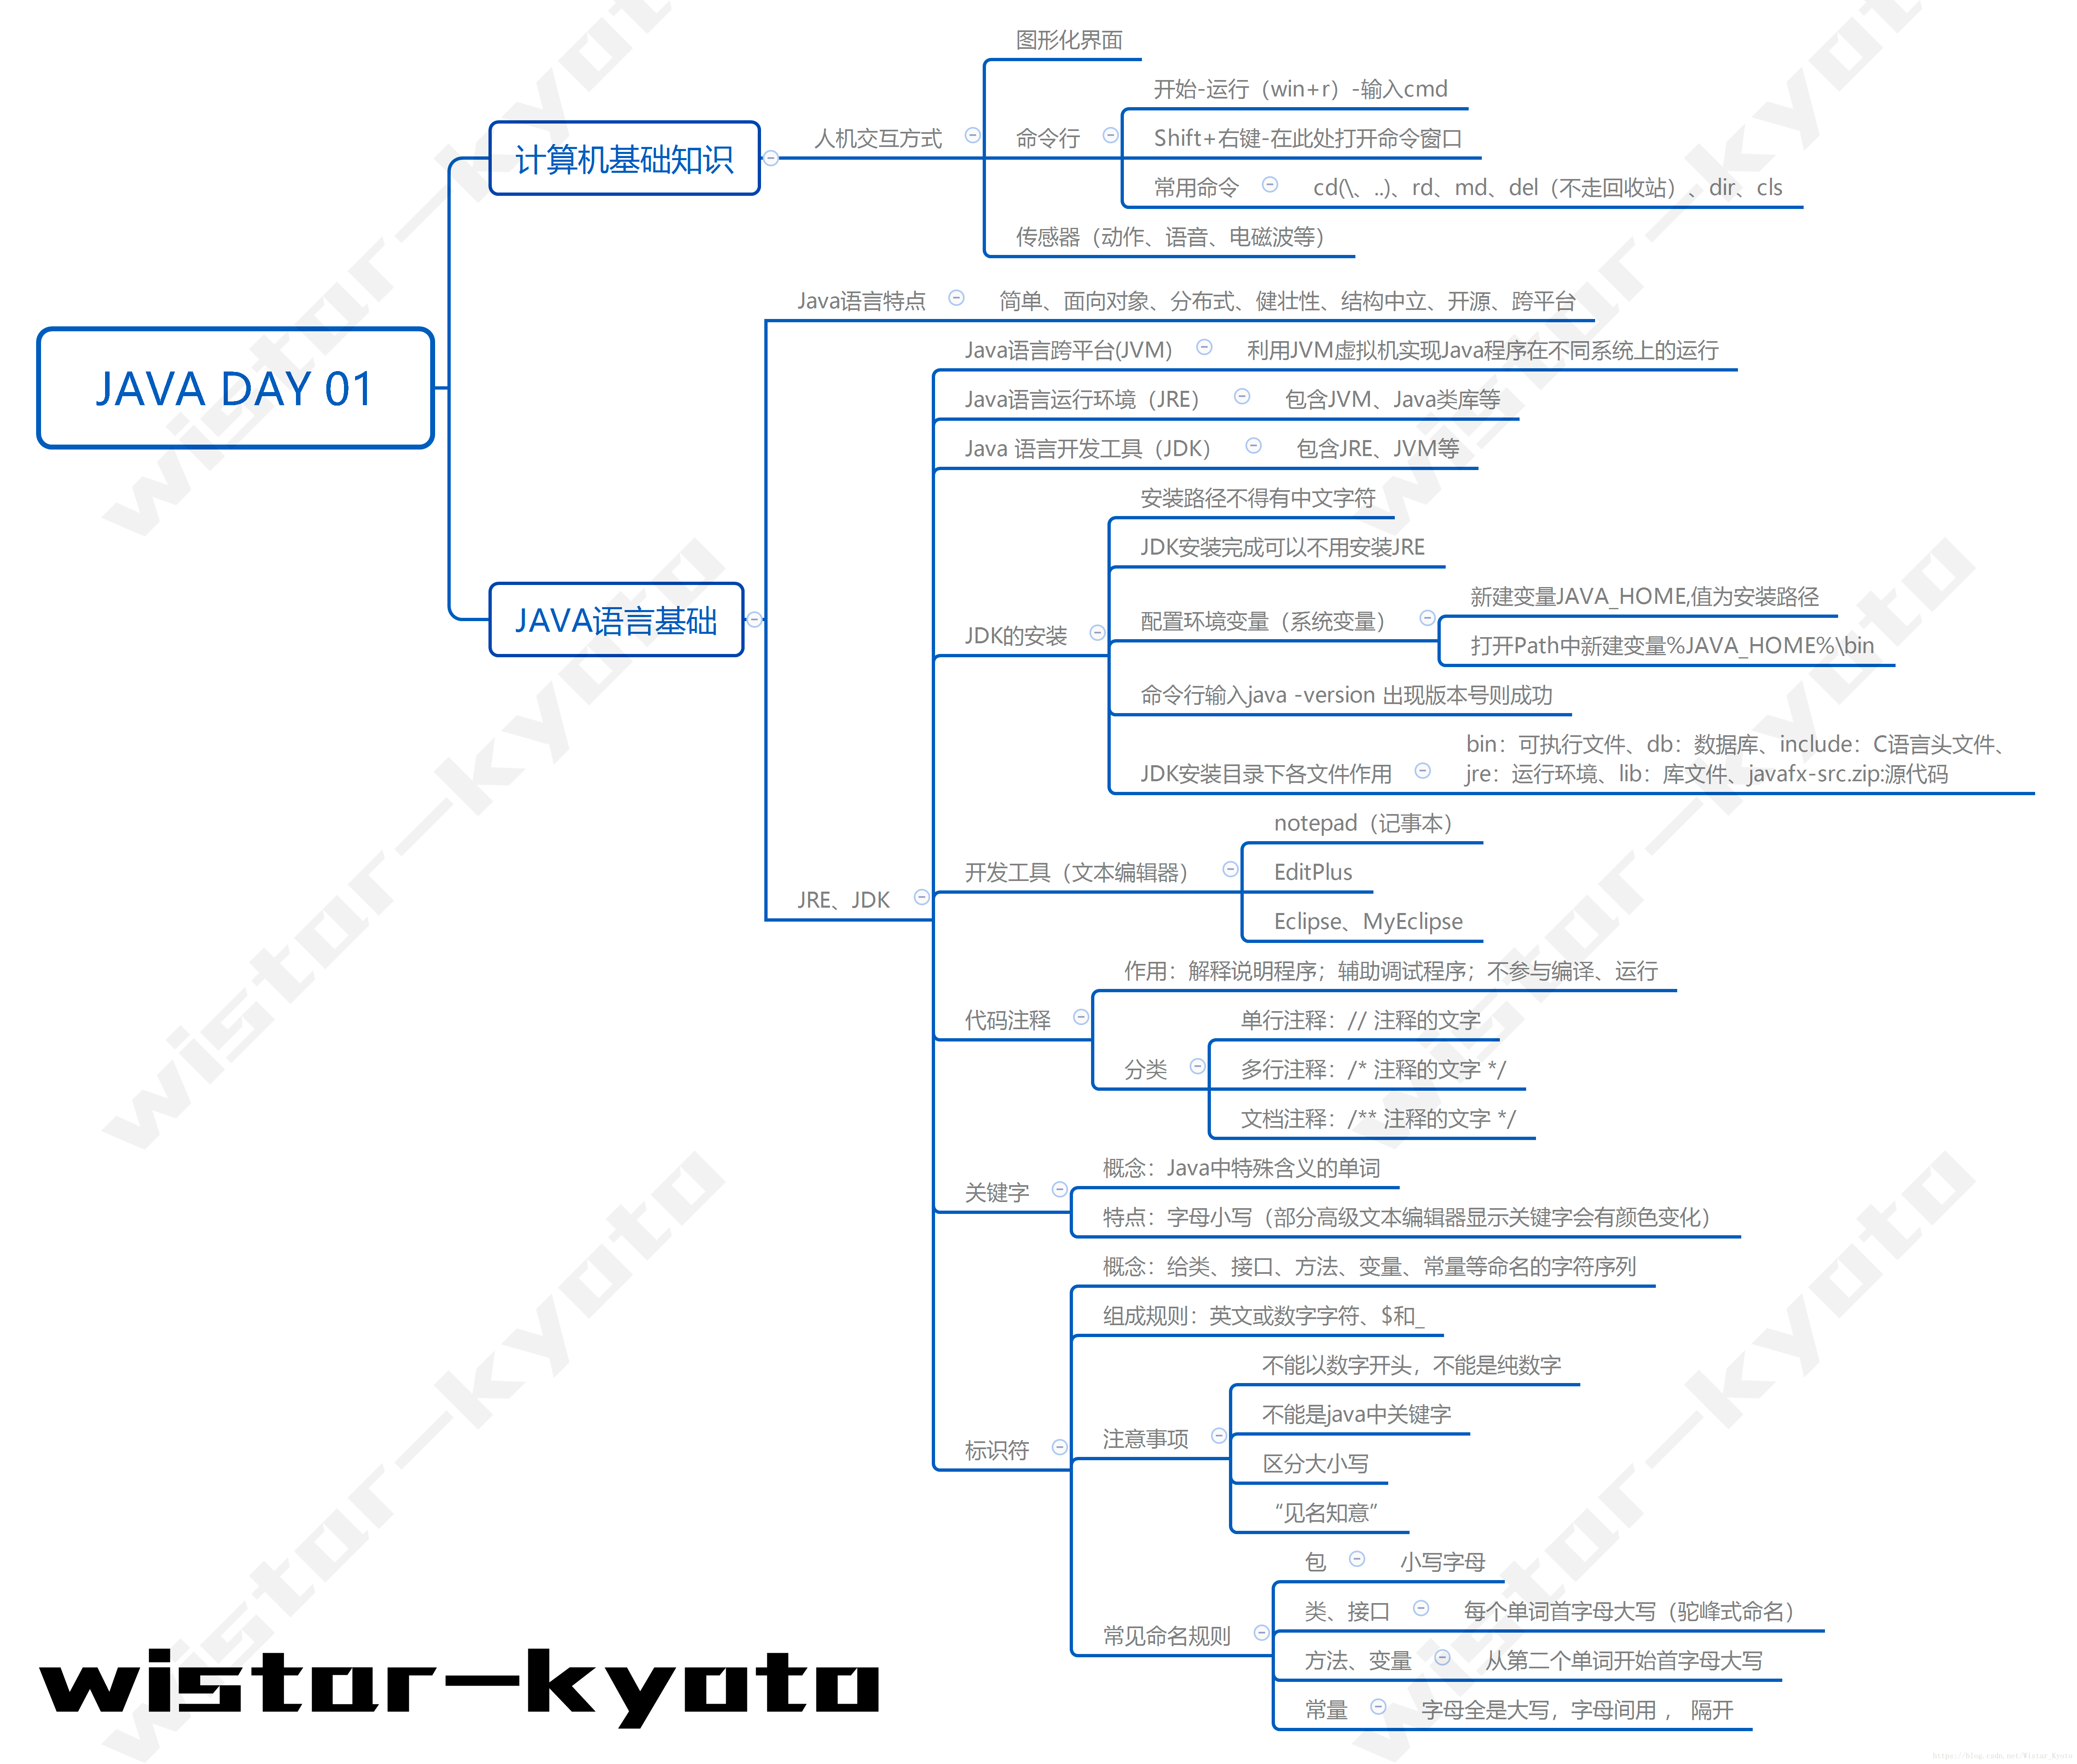 Java day 001